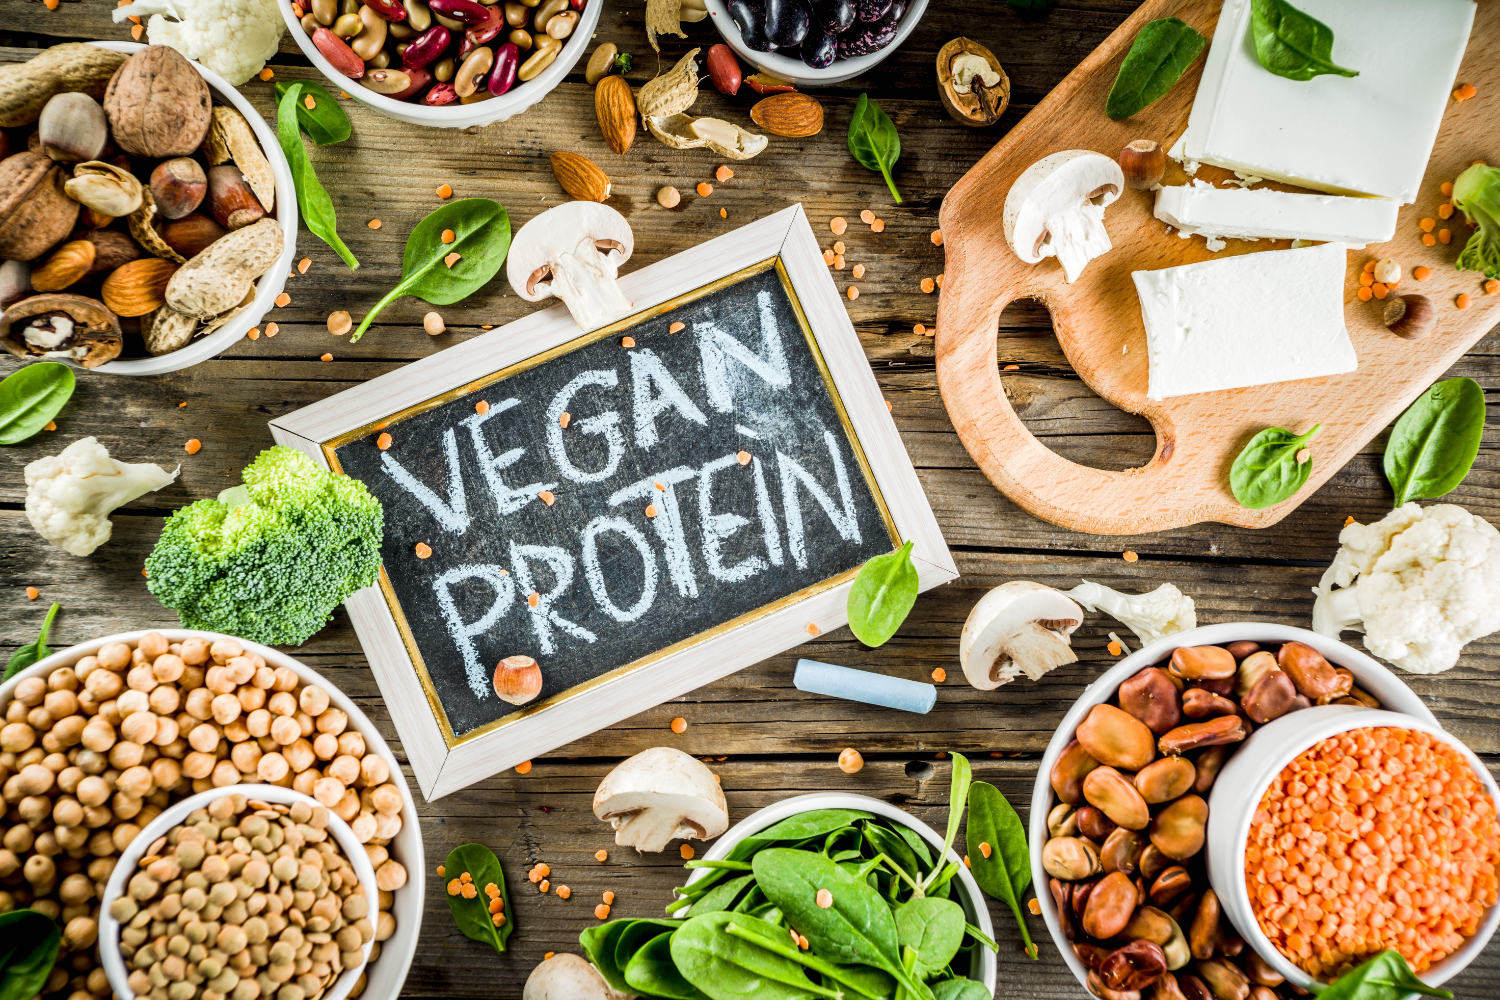 Which animal source of protein is the healthiest?